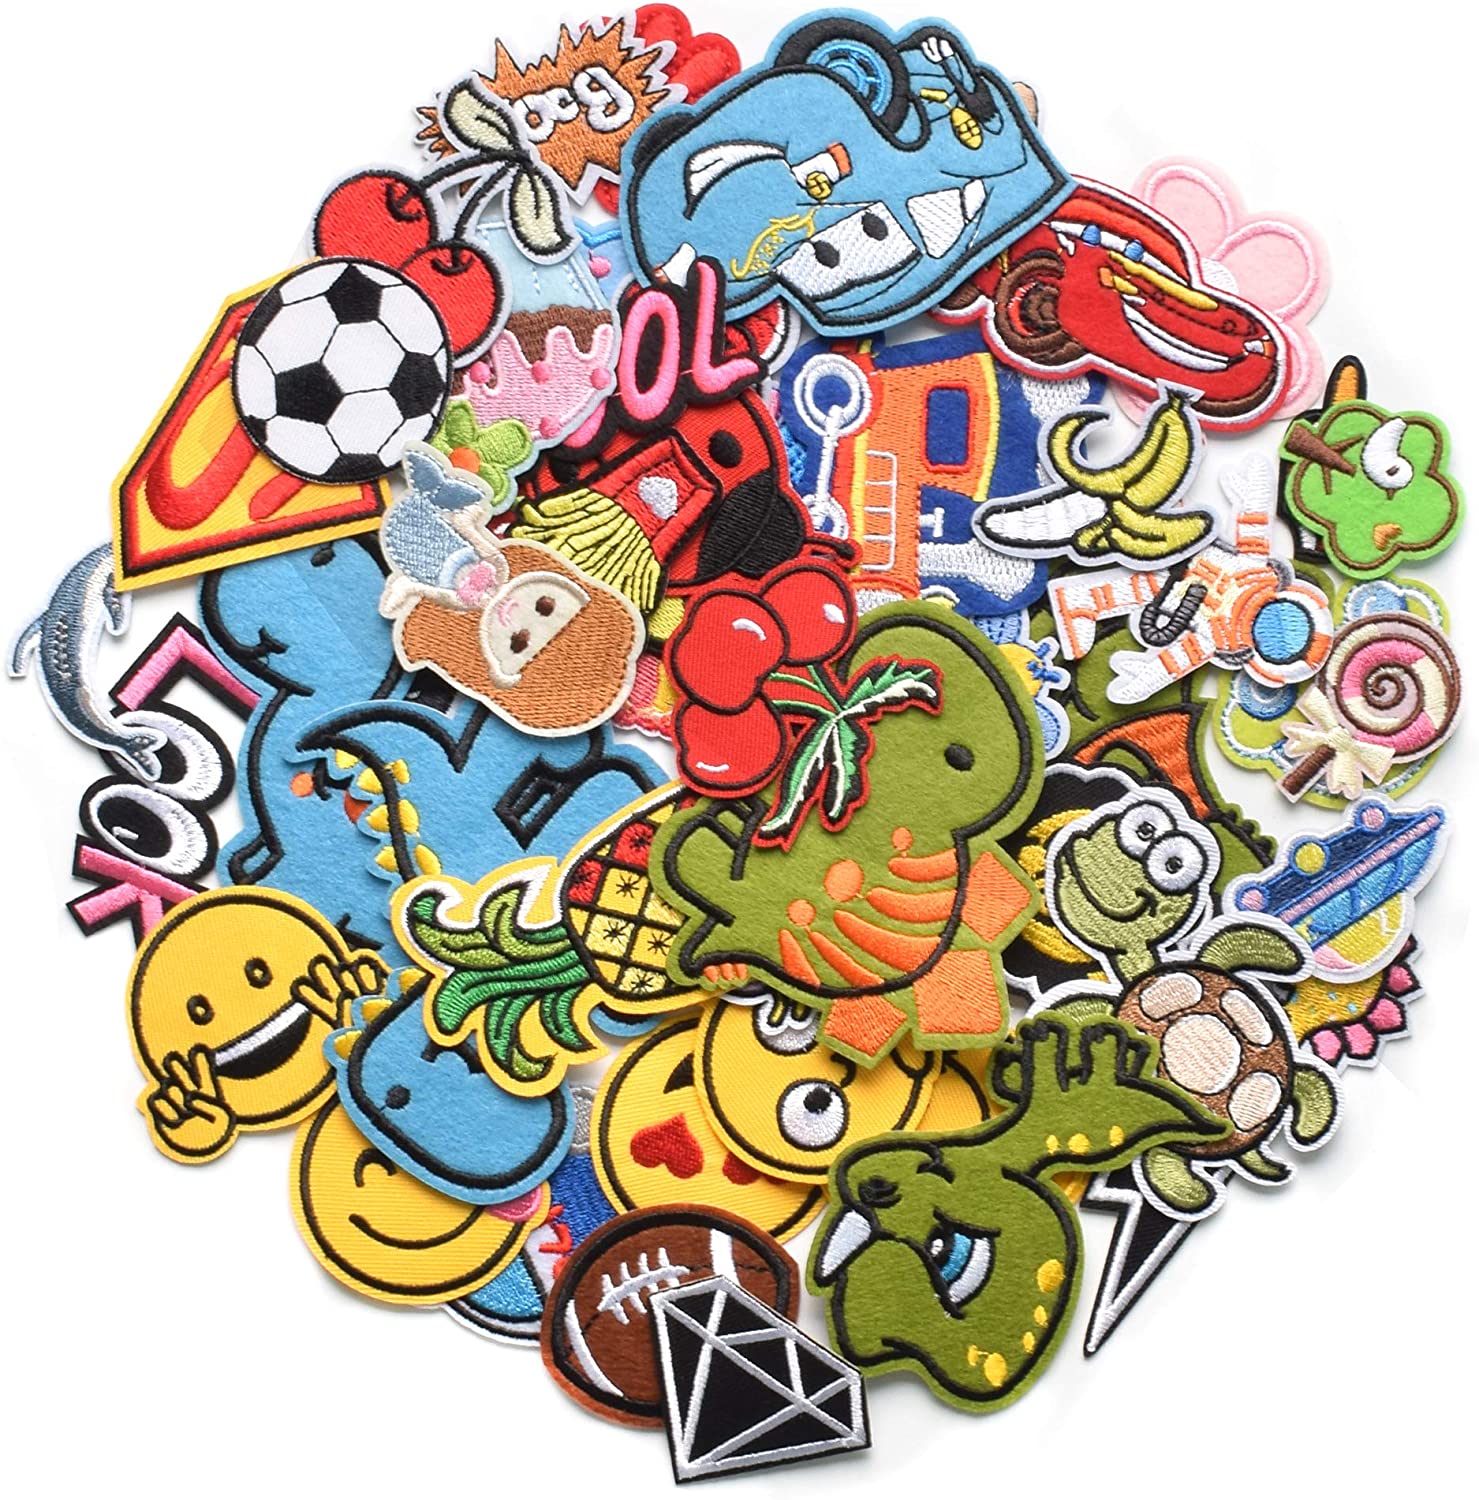 60pcs Random Assorted Styles Embroidered Patches, Bright Vivid Colors, Sew On/Iron on Patch Applique for Clothes, Dress, Hat, Jeans, DIY Accessories